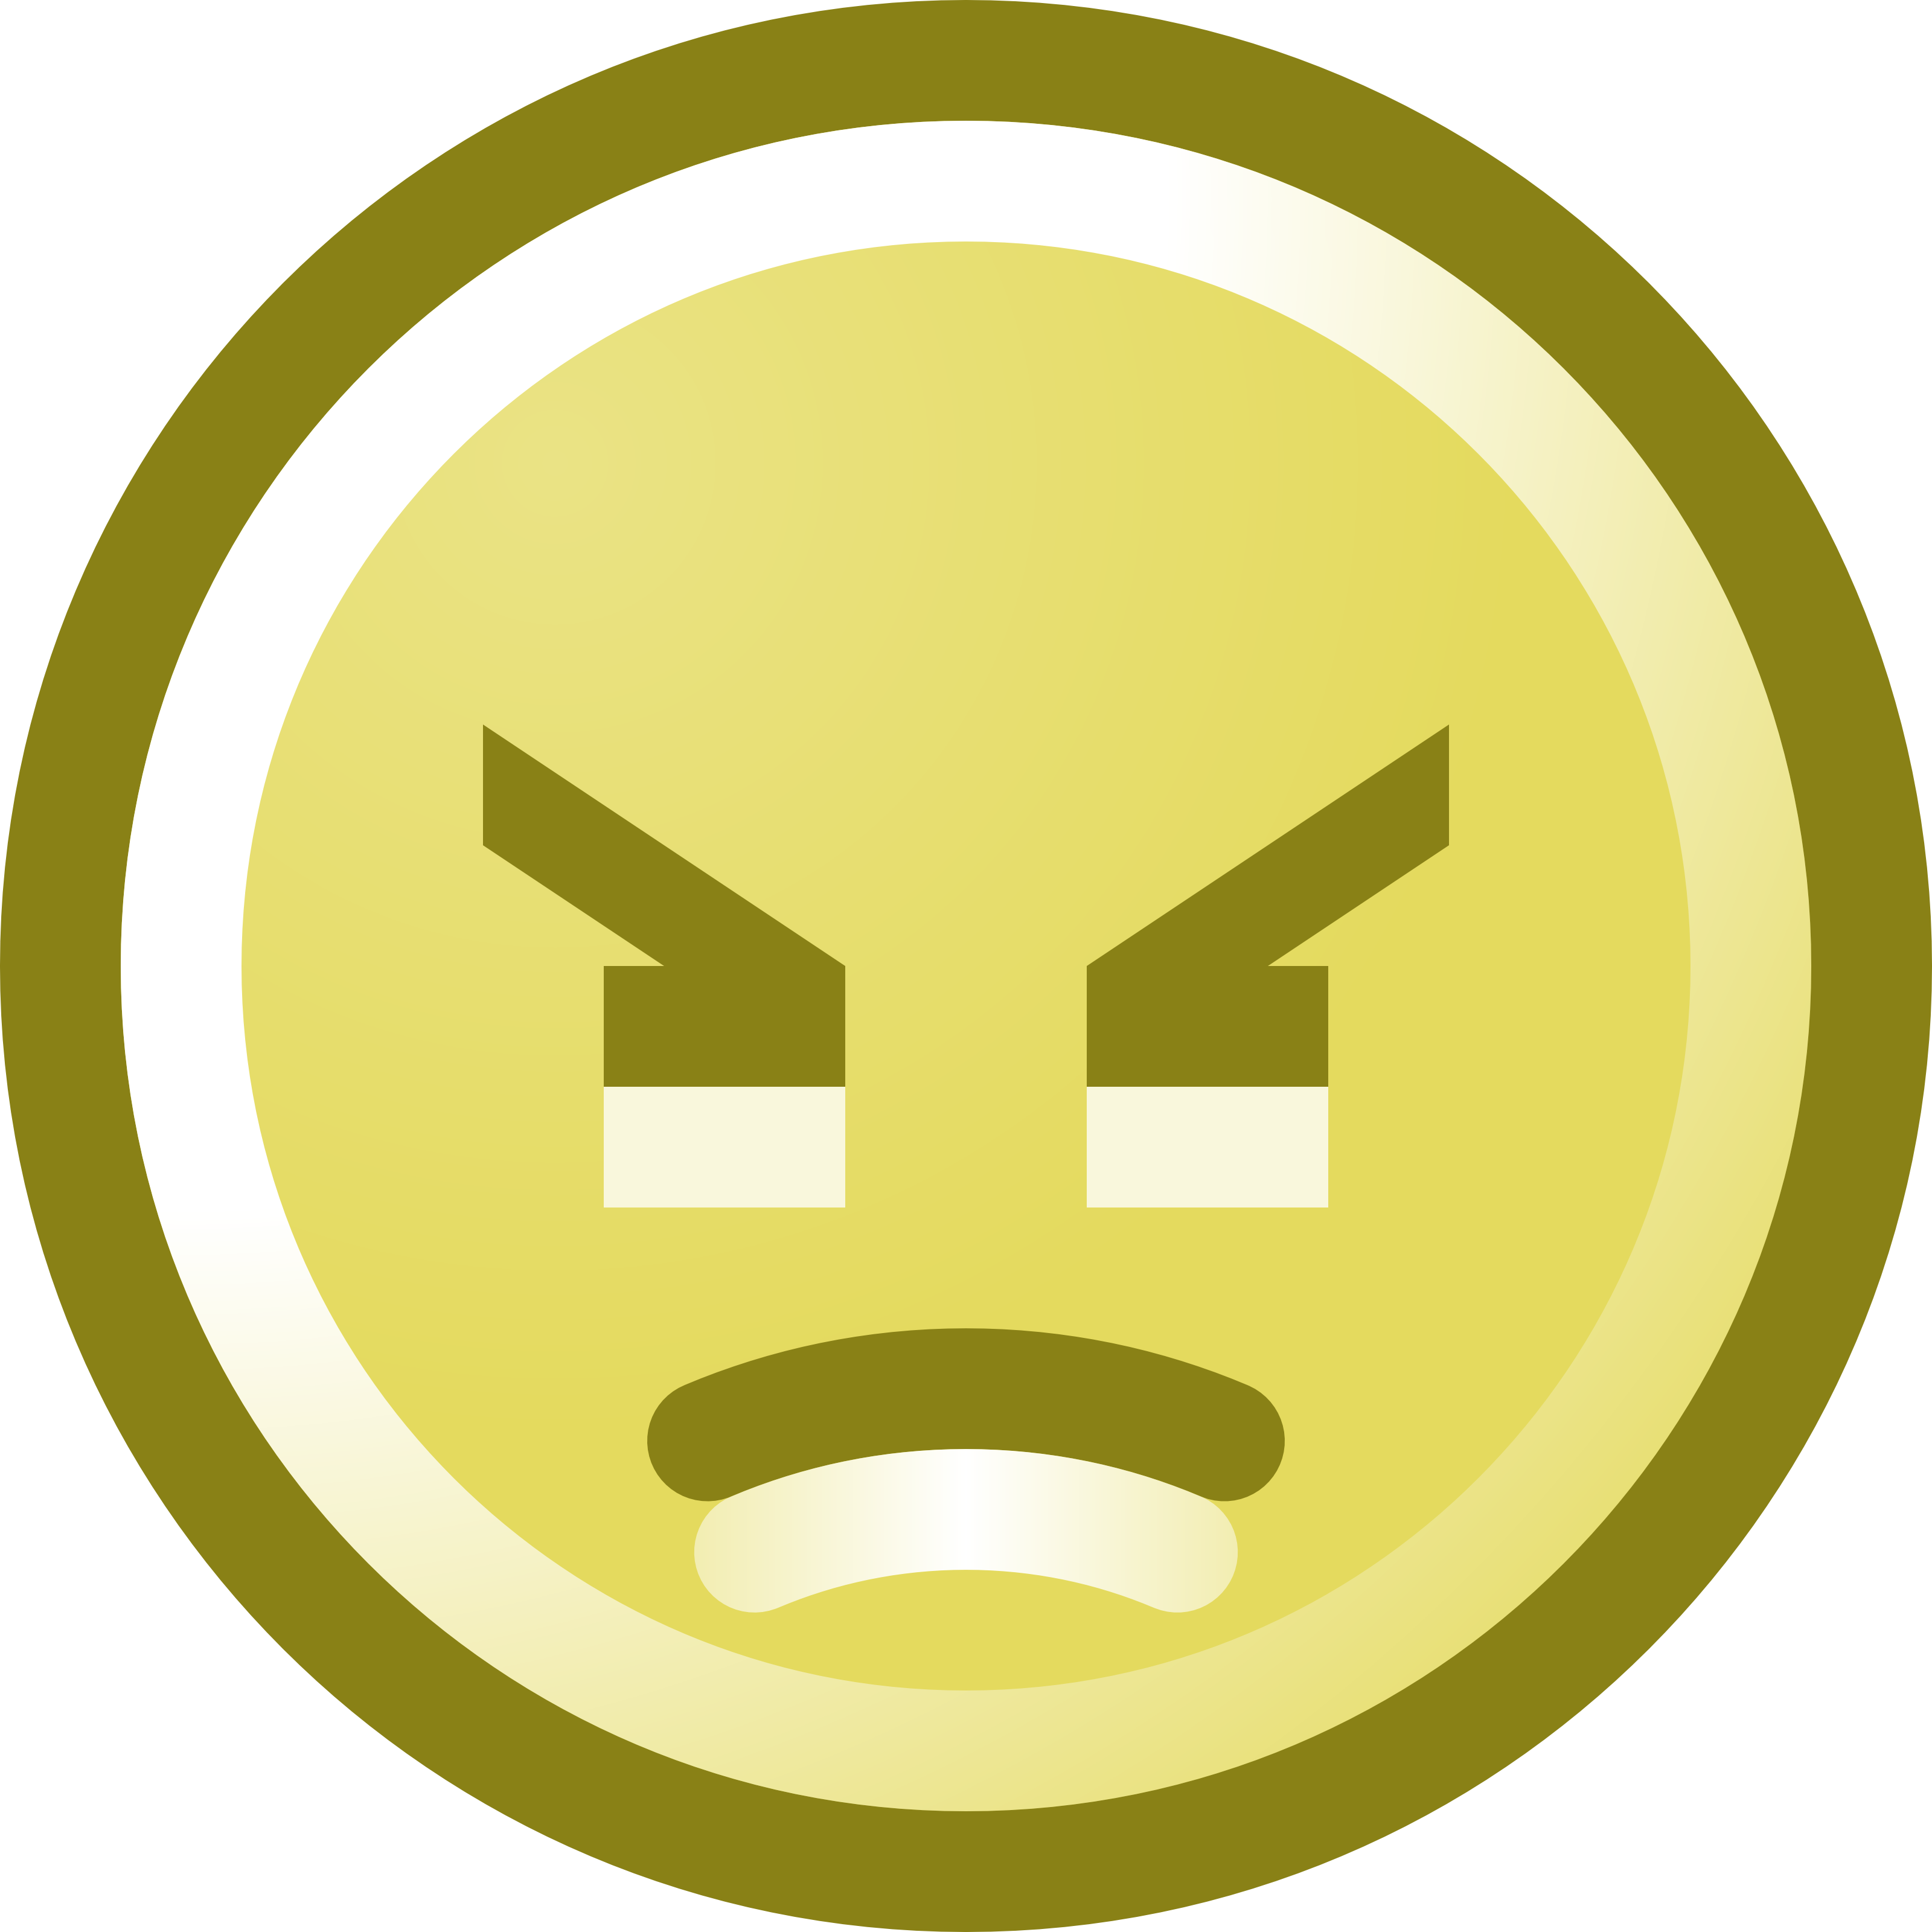 Free Angry Smiley Face Clip Art Illustration By 000129 - Smiley Face Clip Art (3200x3200)